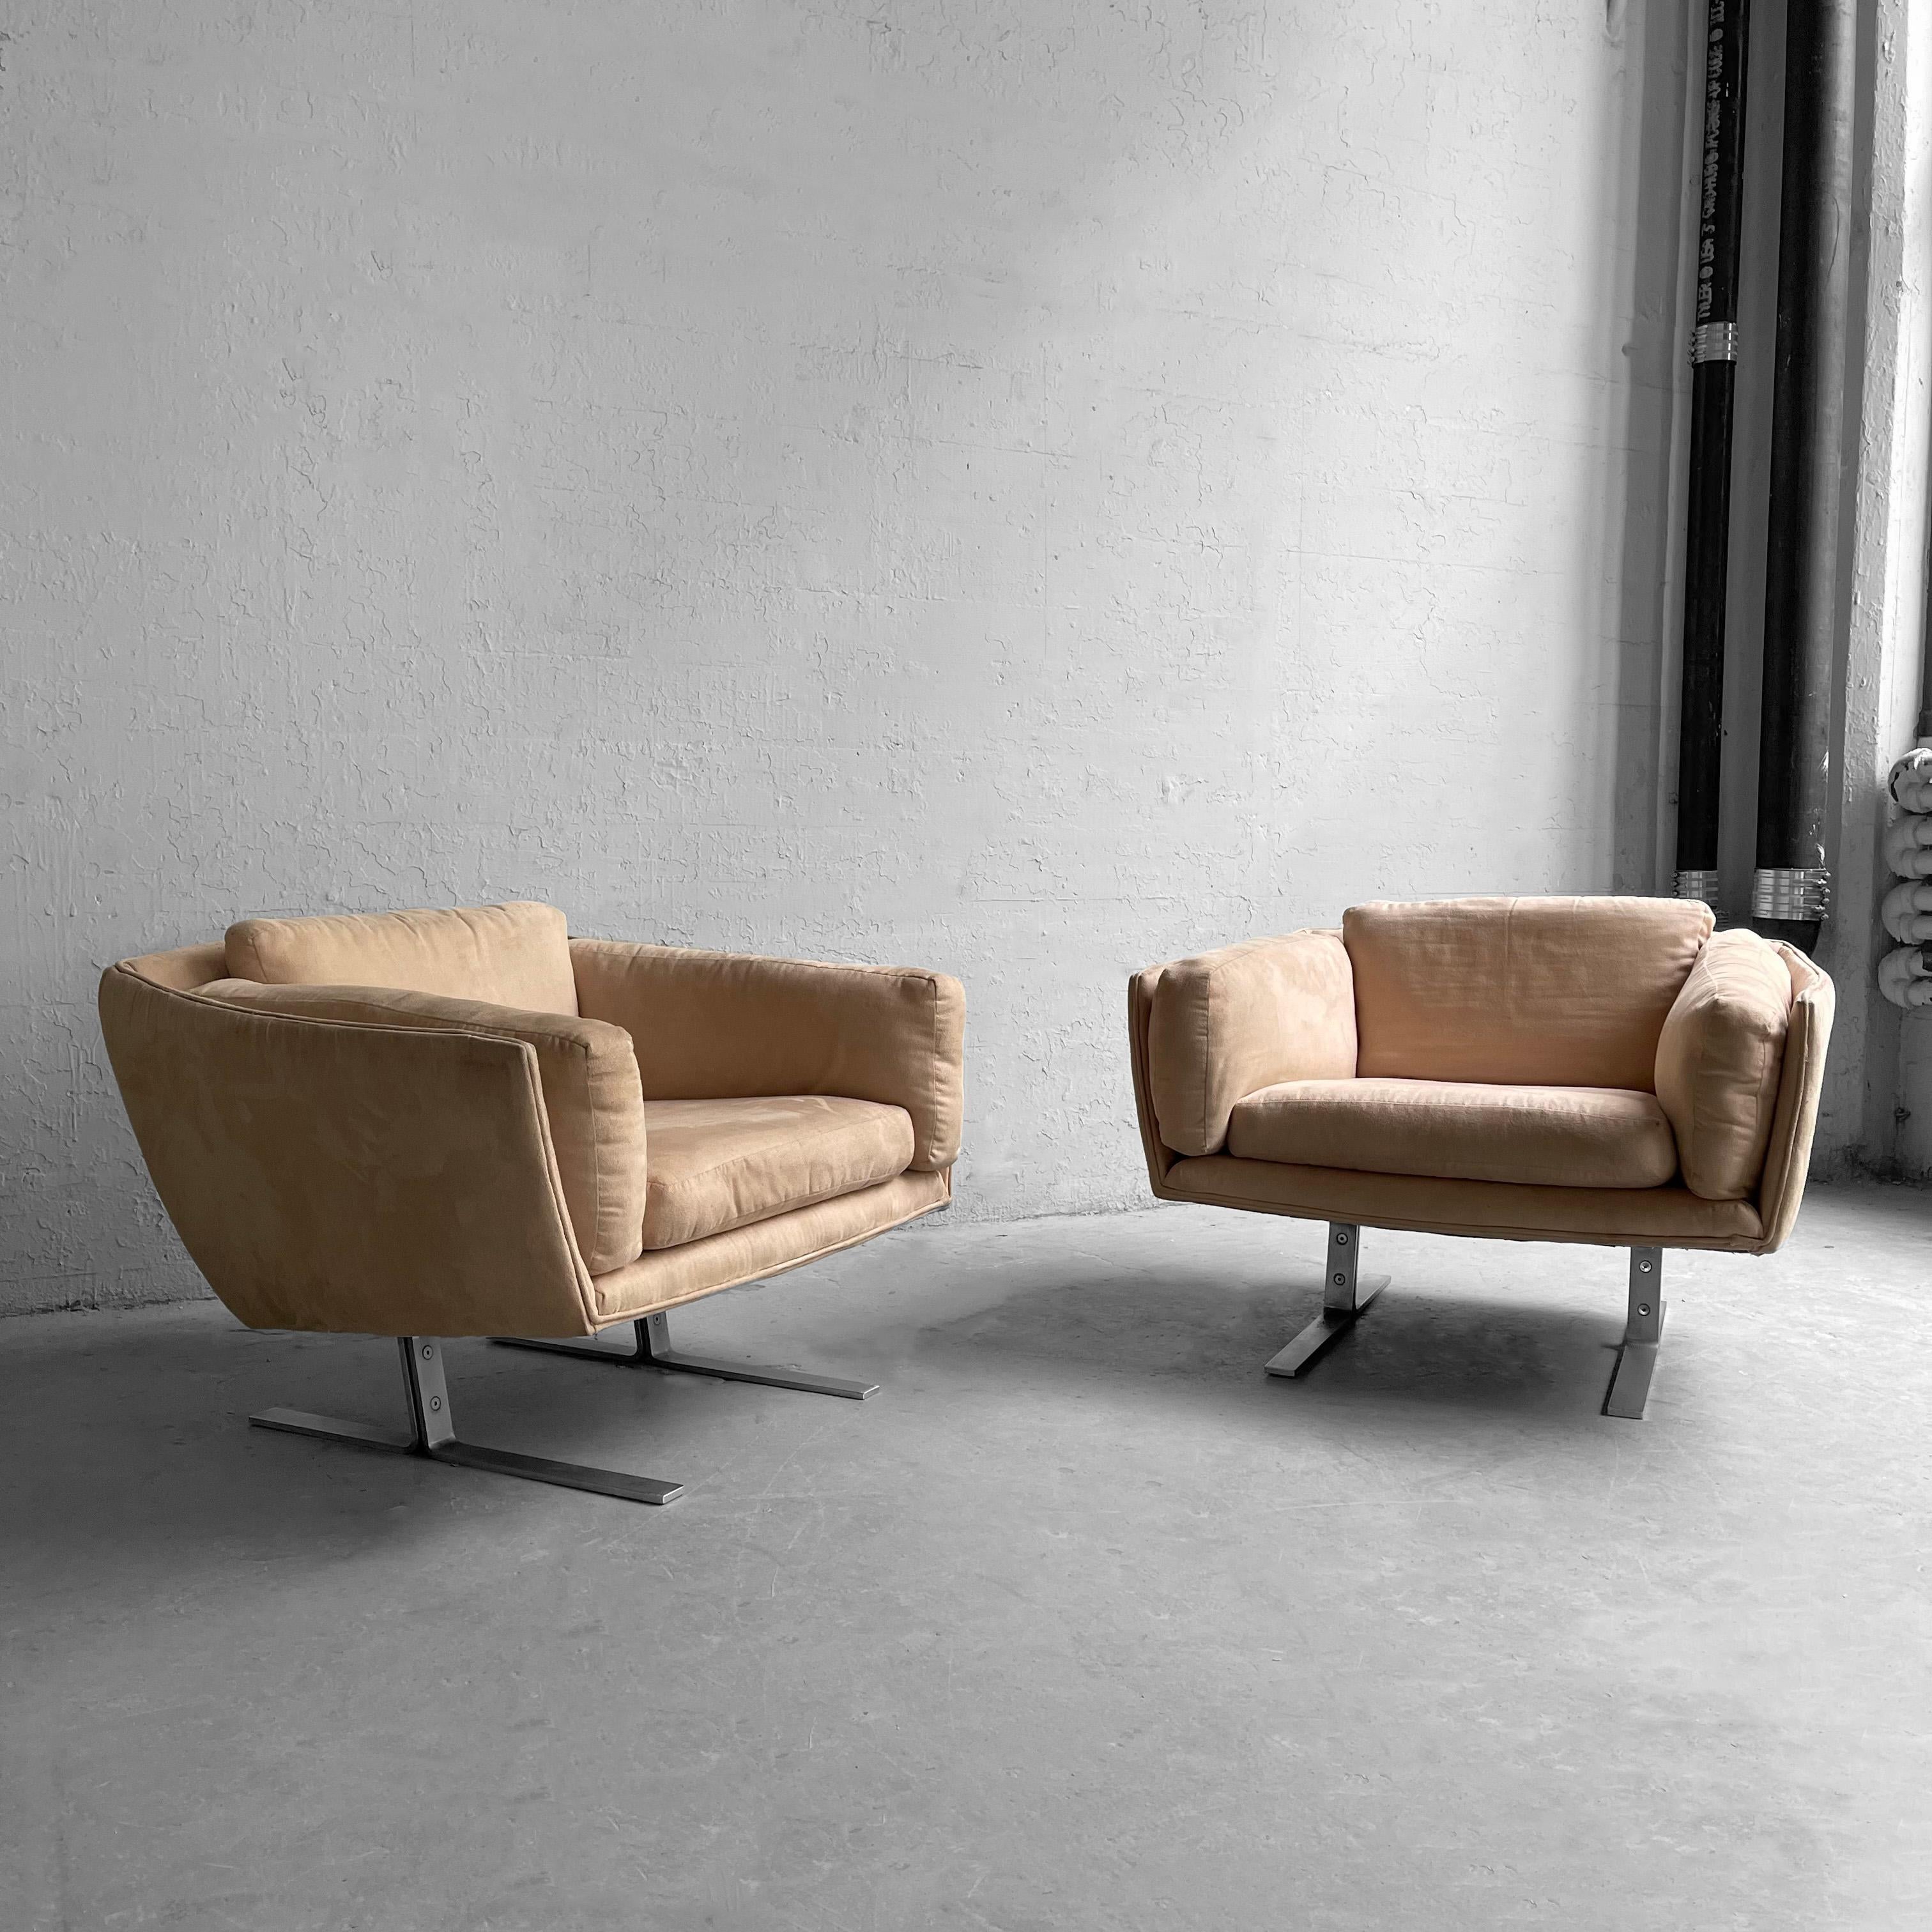 Pair of mid century modern, club, lounge chairs in the style of Milo Baughman feature flat bar chrome bases with fully upholstered bodies and cushions in cream ultra suede. The chairs present a sleek, low profile while also being very comfortable.